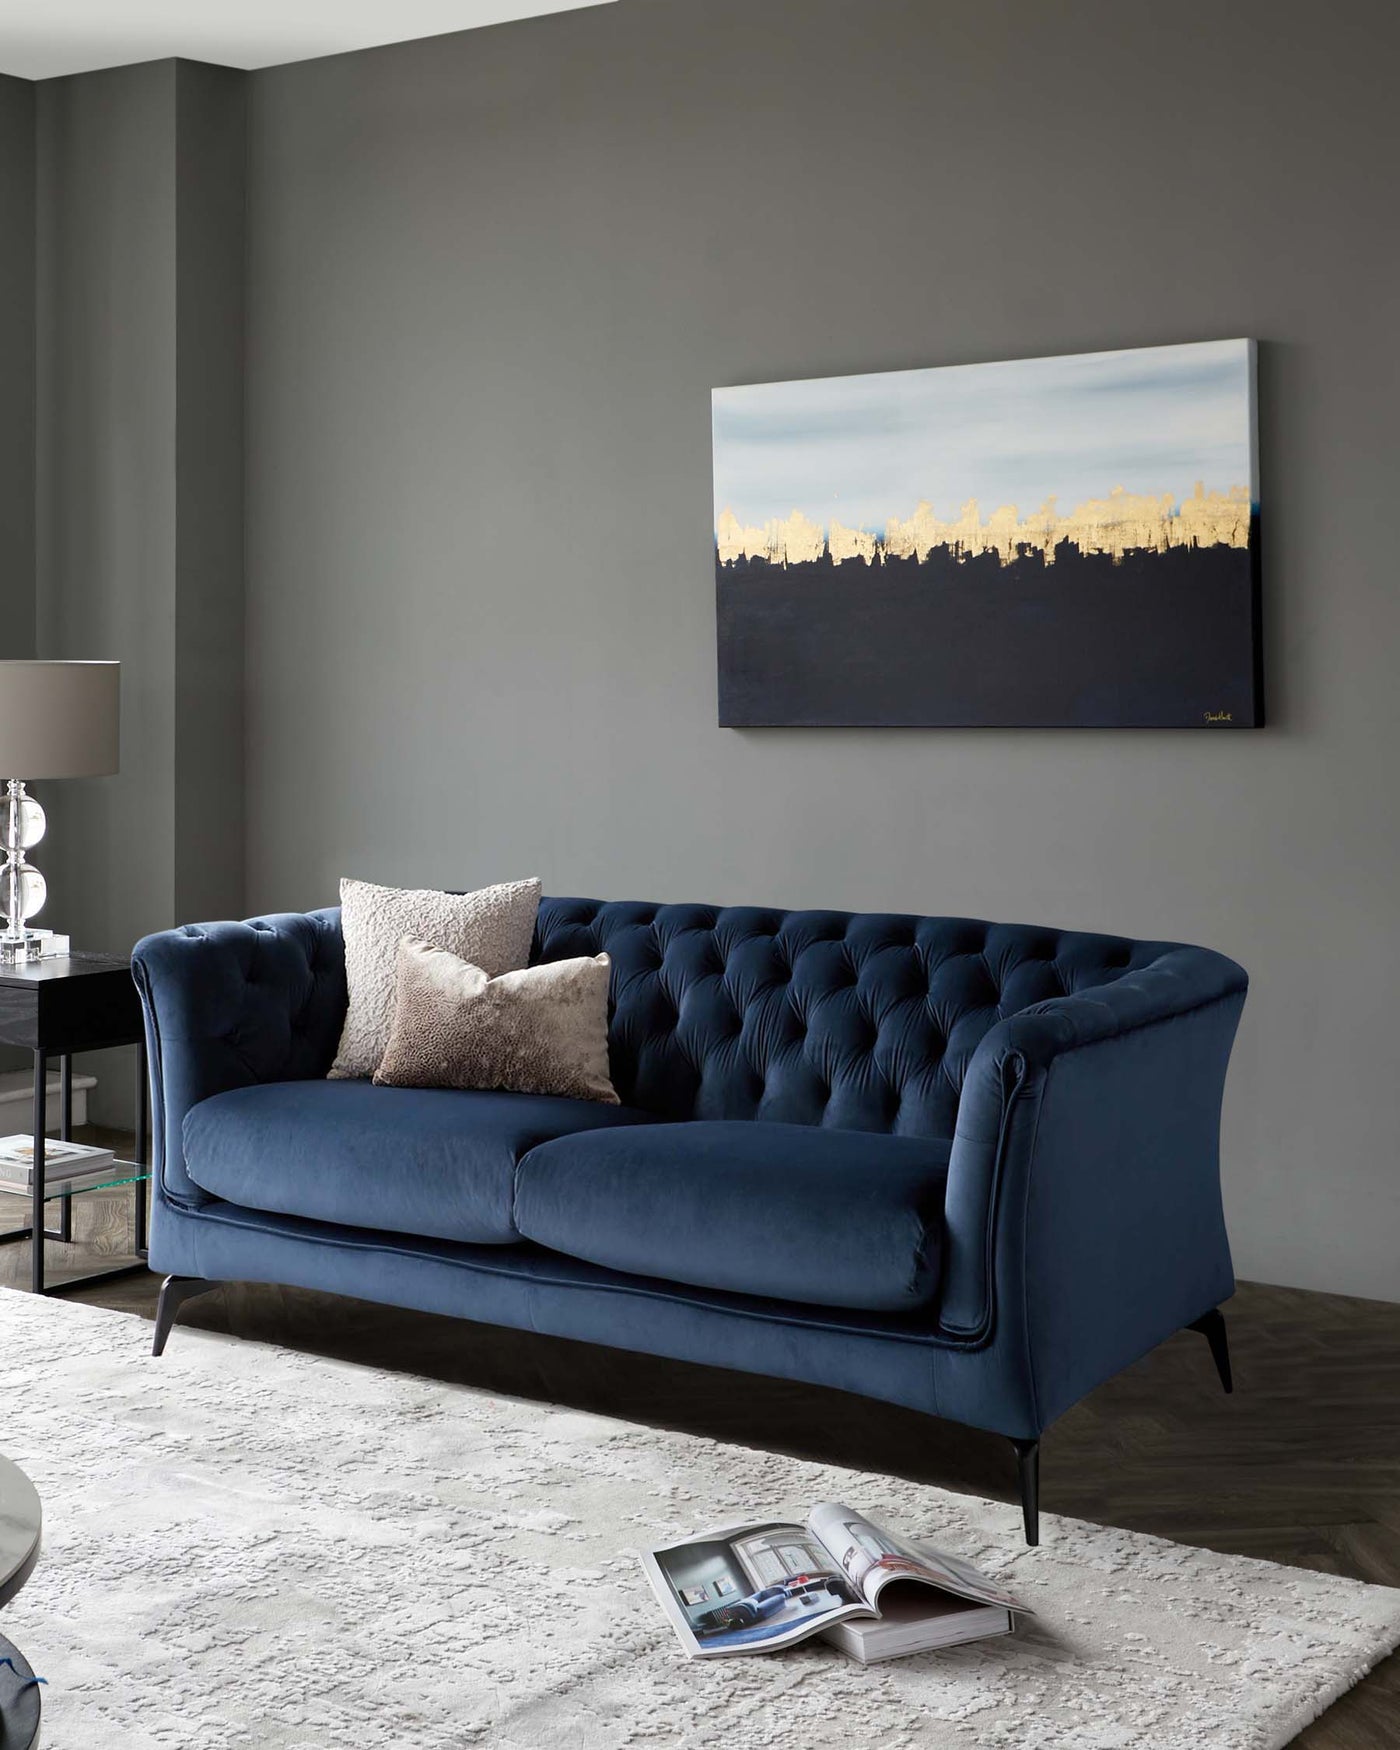 Elegant navy blue velvet sofa with tufted backrest, featuring dark wood legs, complemented by a variety of textured cushions.